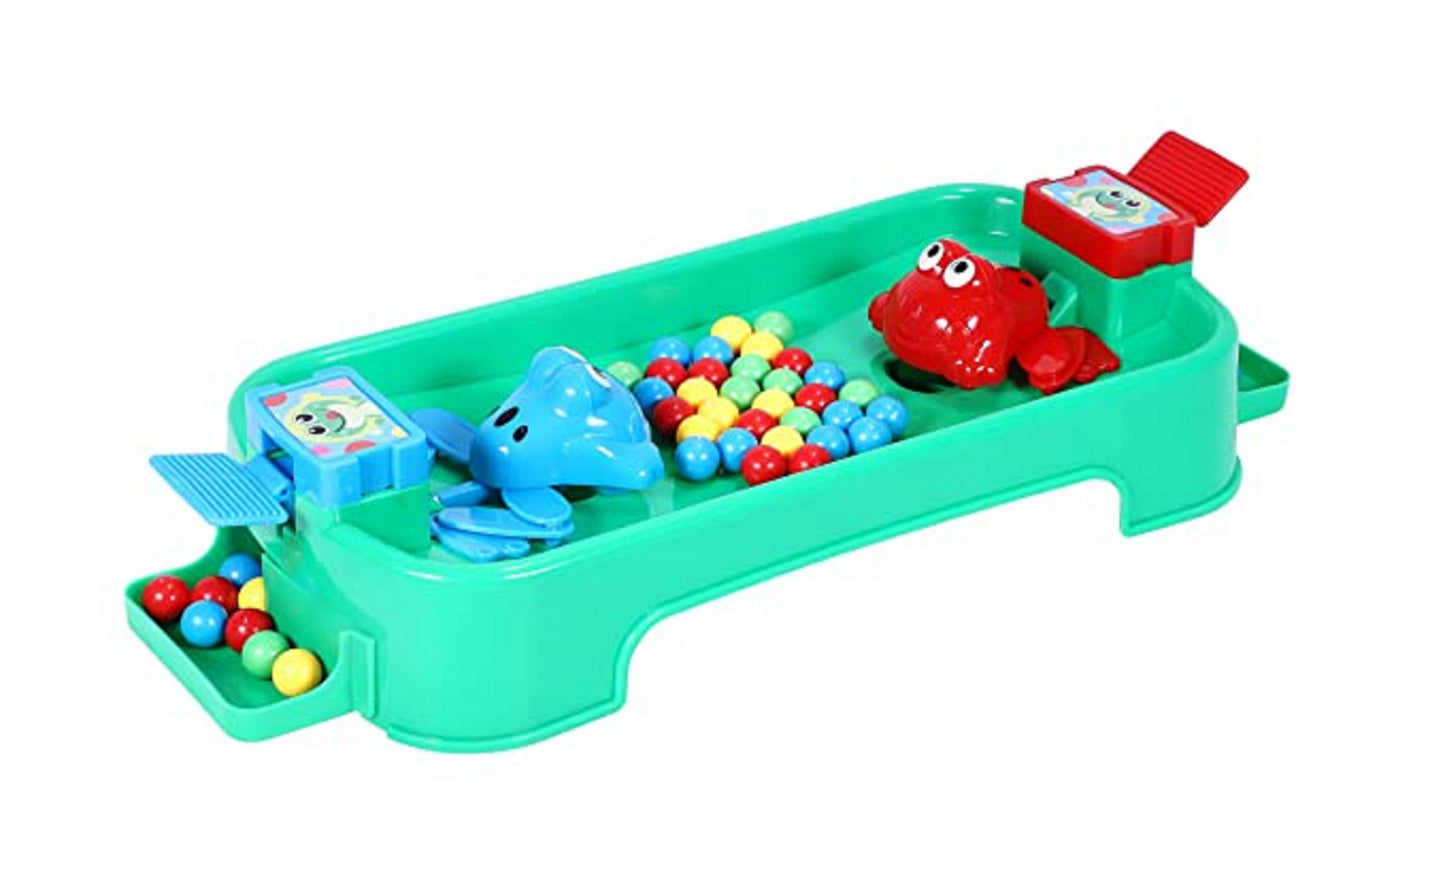 Buy NHR Hungry Frog Eating Beans Games Interactive Game Toy For